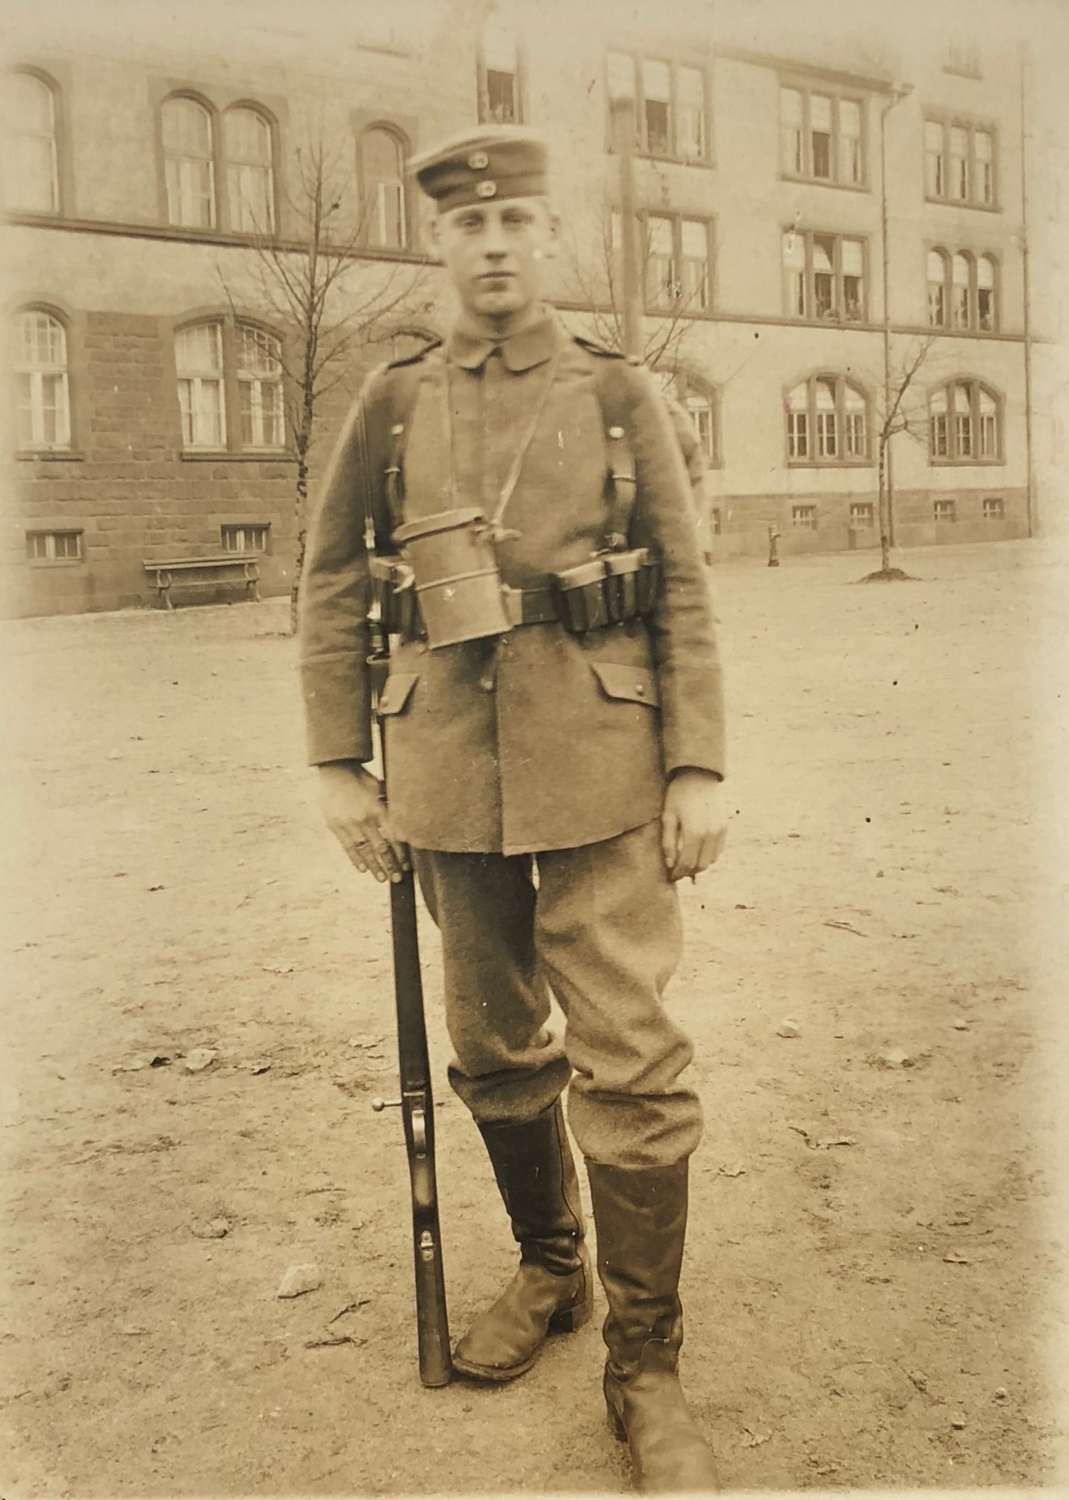 WW1 Imperial German Infantry Soldier Photograph.